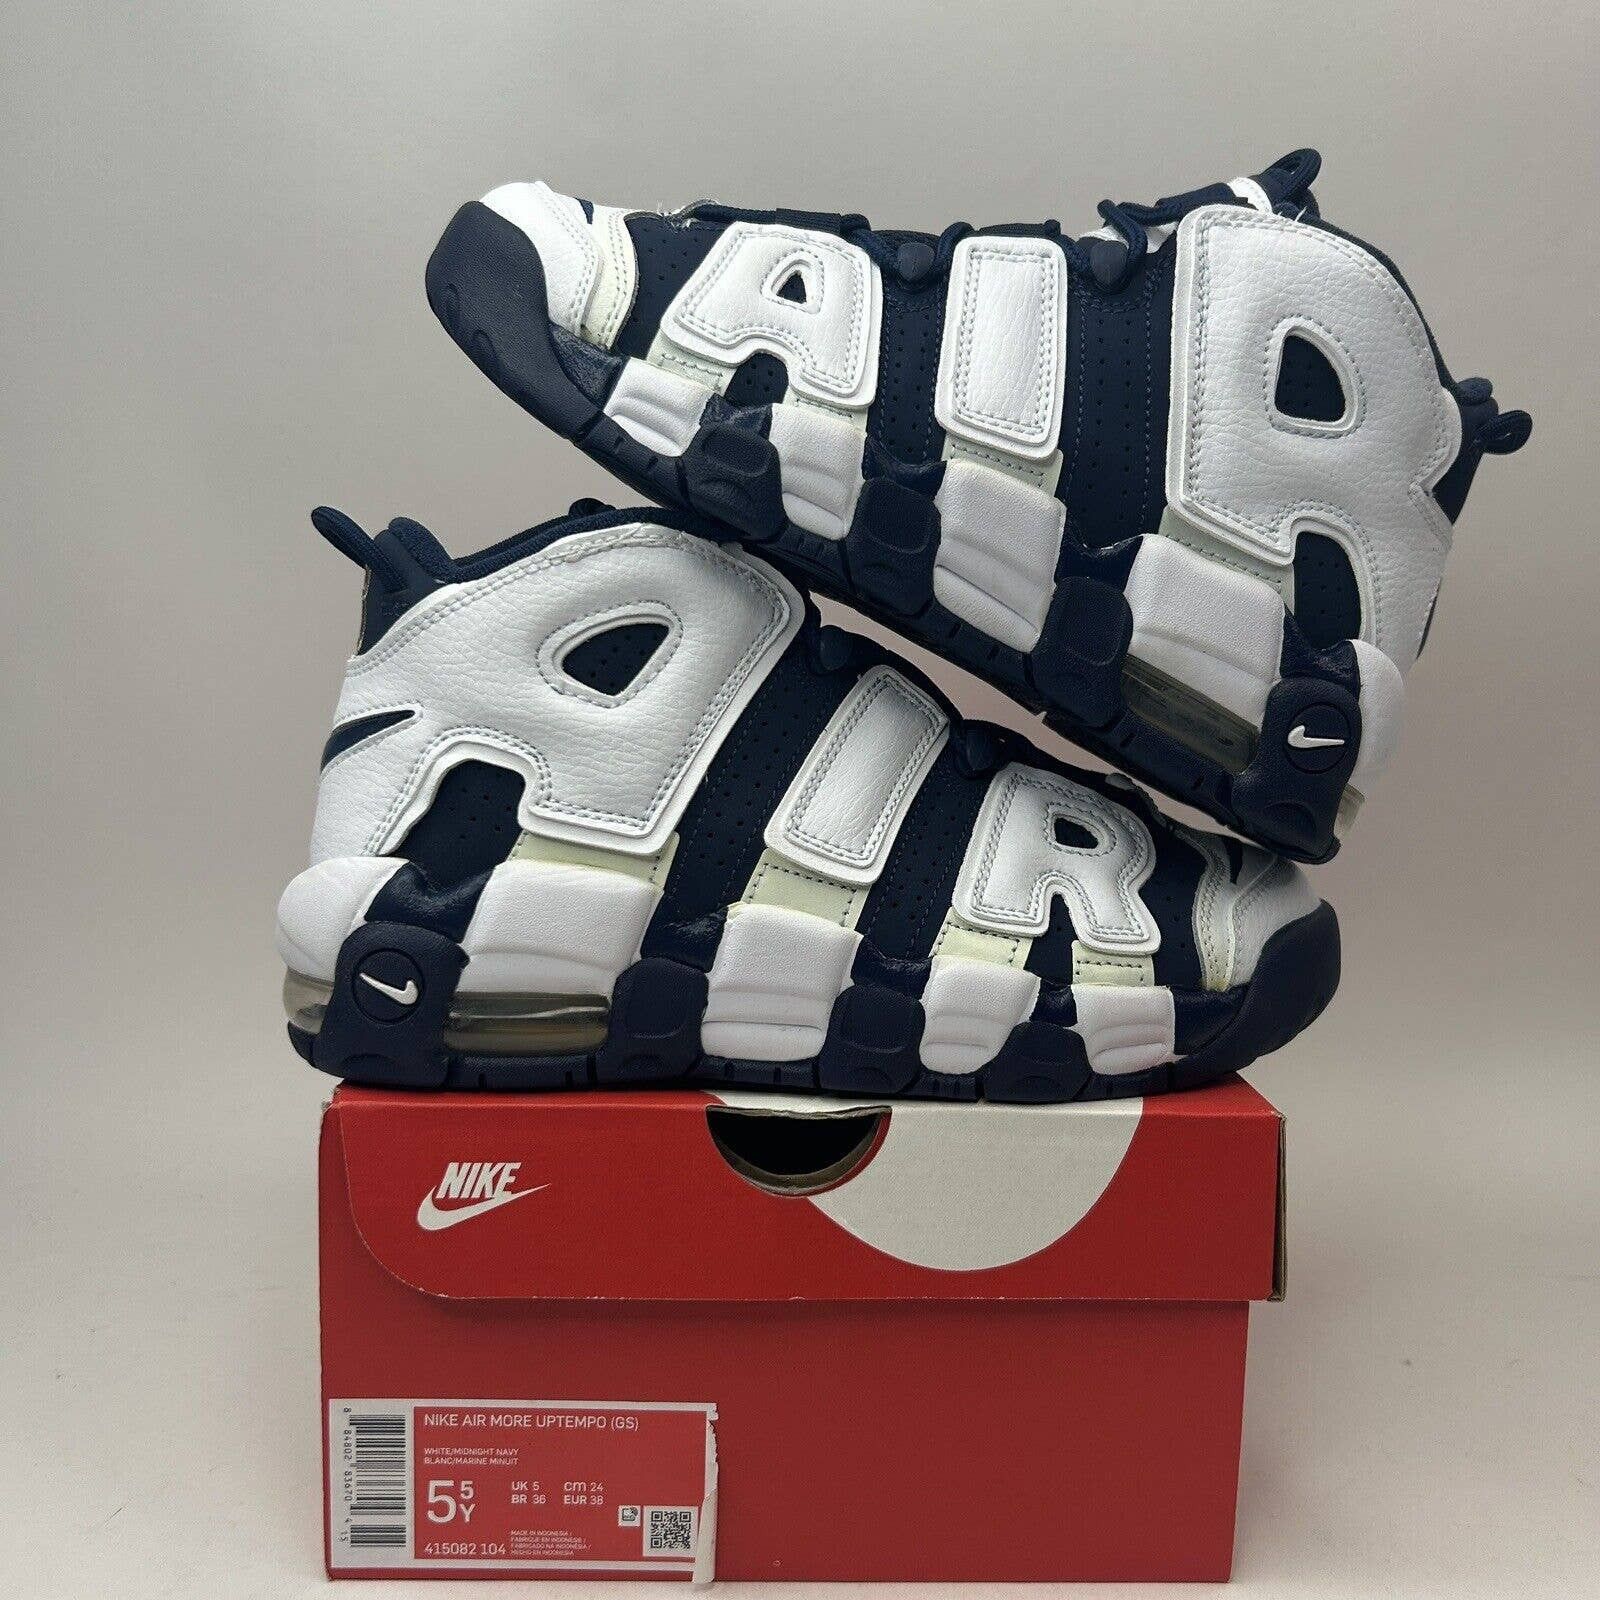 Nike Nike Air More Uptempo GS “Olympic/White Midnight Navy Blue”